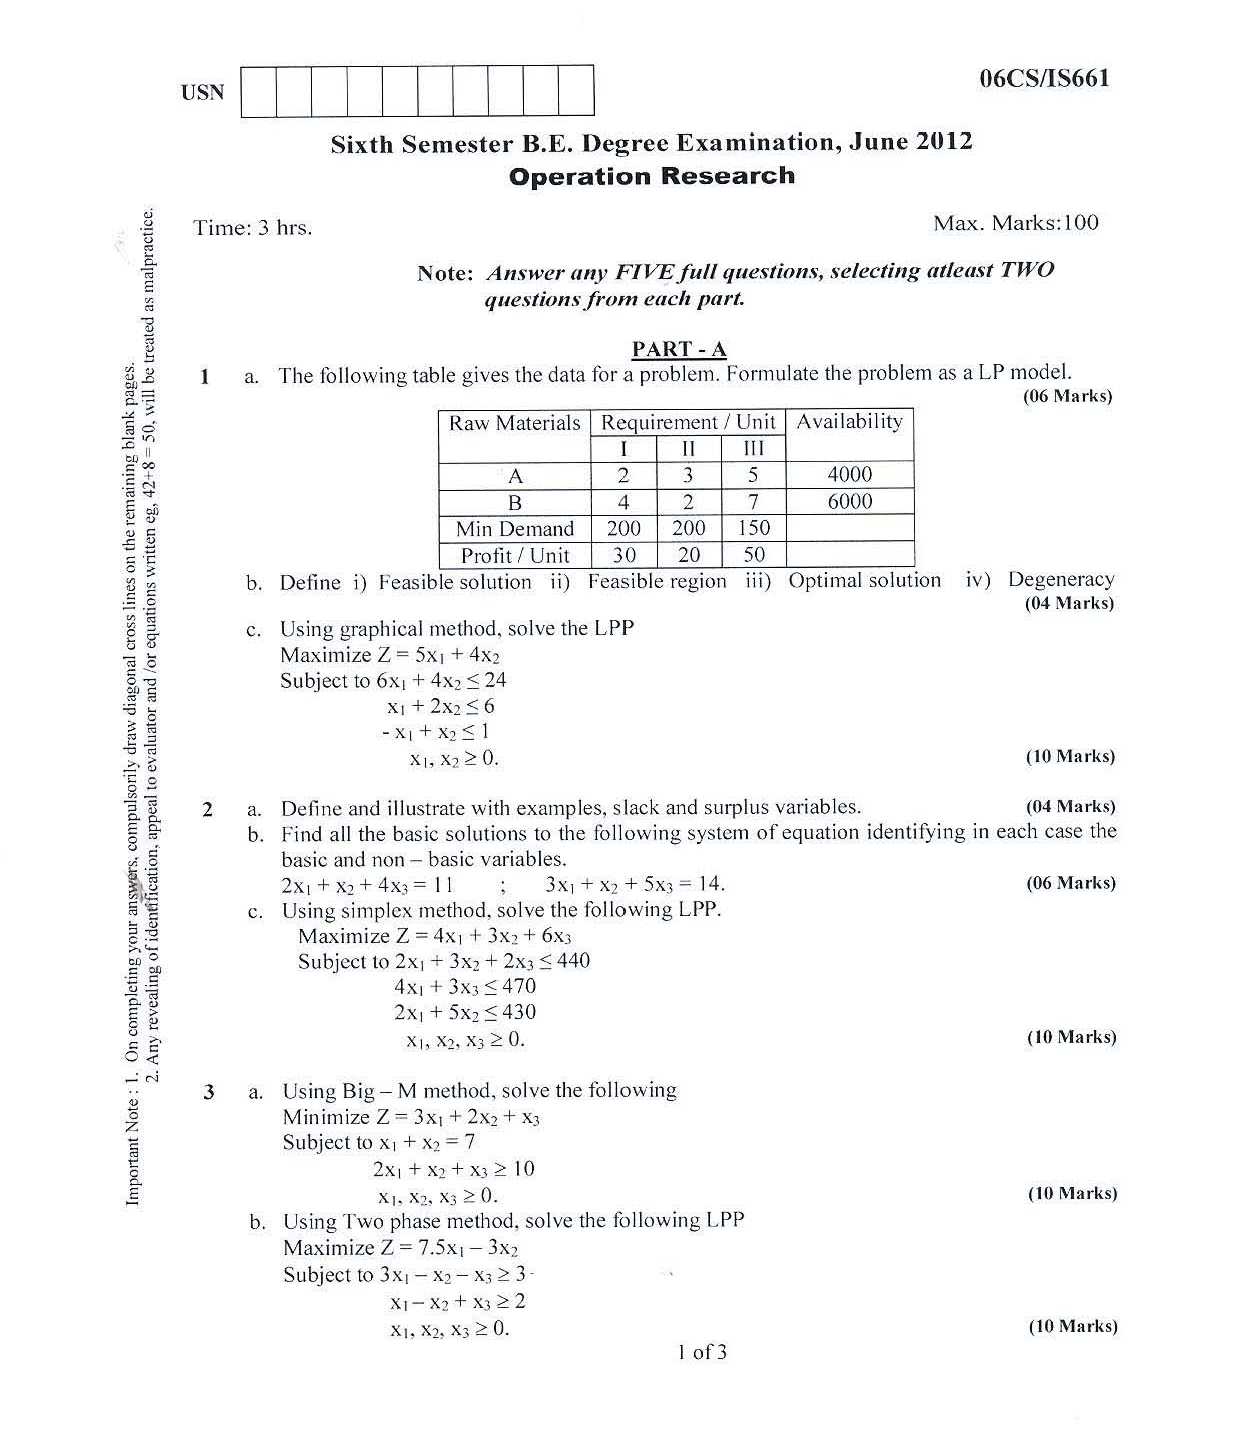 du operational research previous year question paper